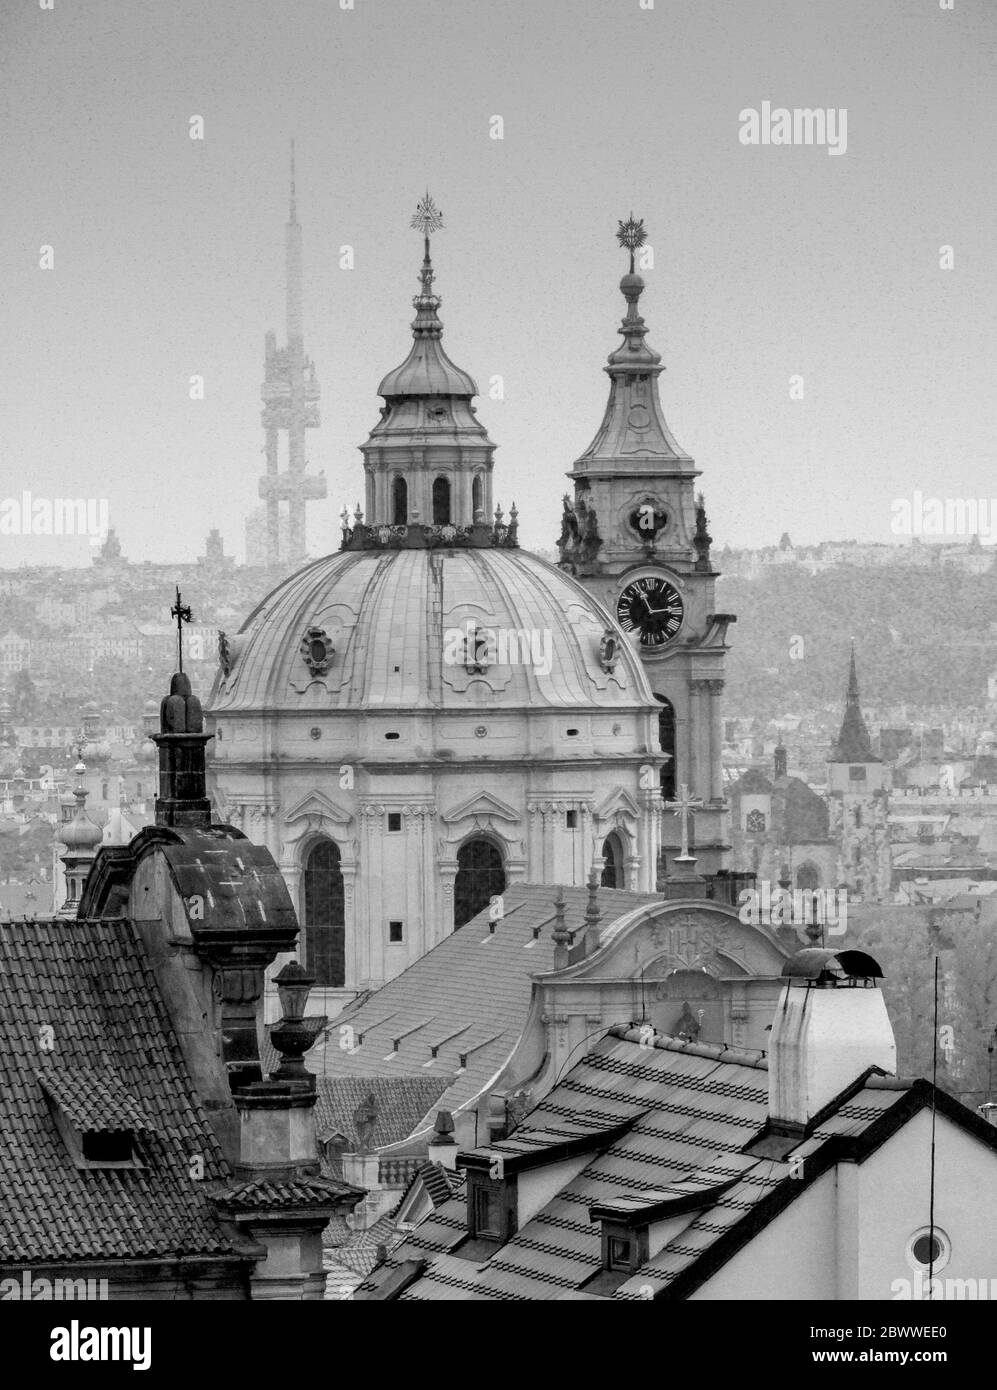 Church Of St. Nicholas from the Prague Castle - Pra?sk? Hrad with the city skyline. The Baroque church was built between 1704-1755. Czech Republic. Stock Photo